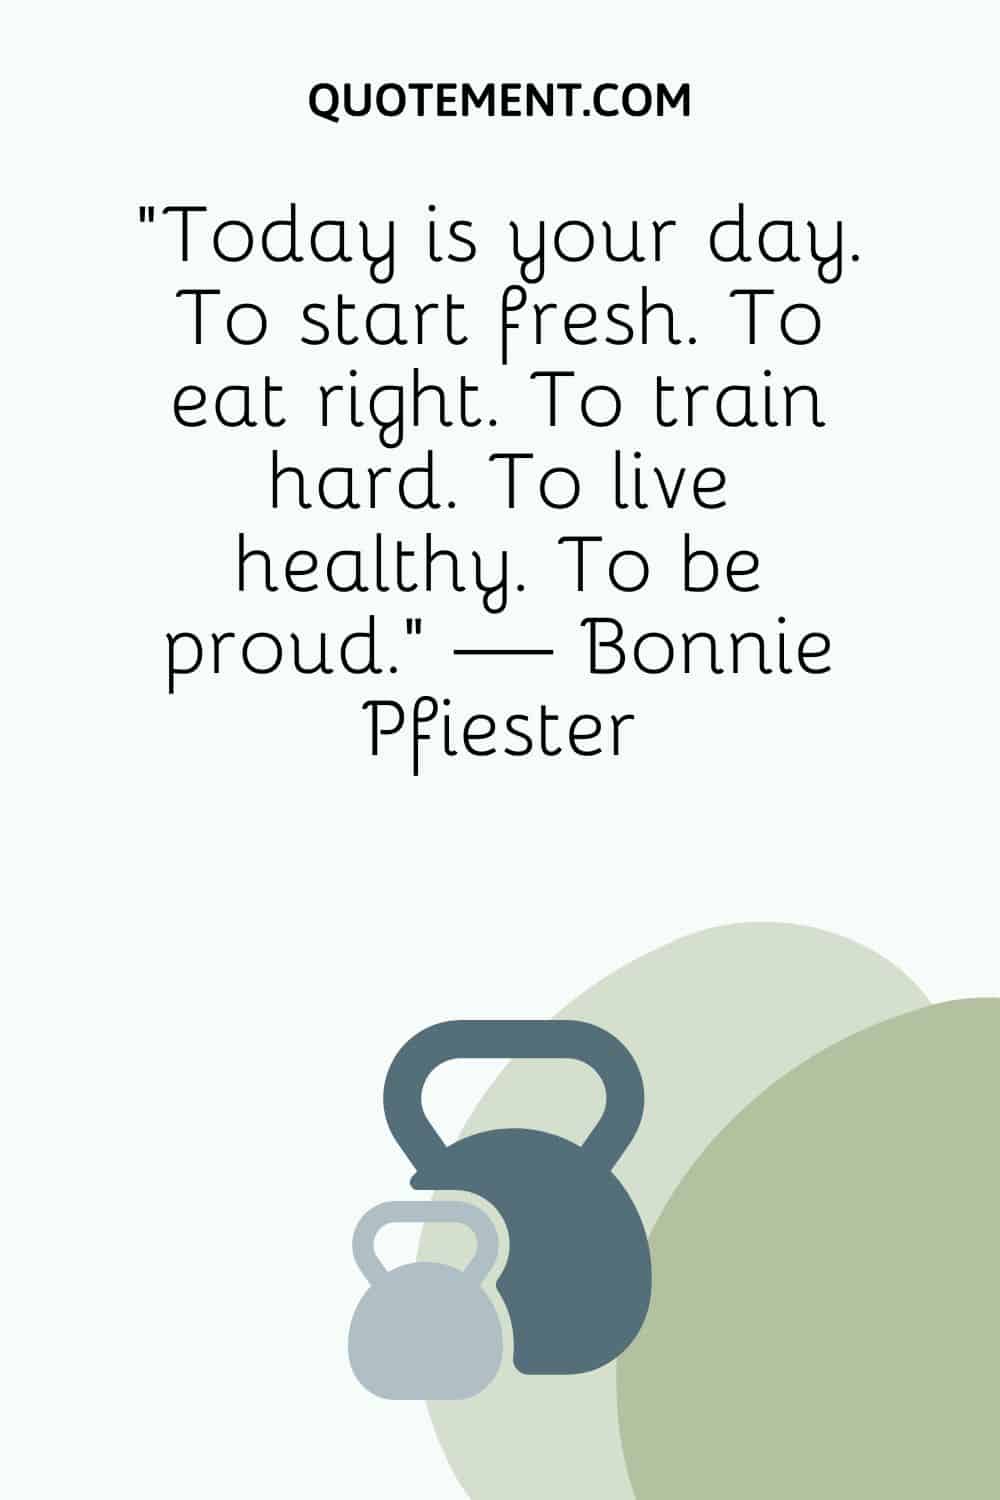 “Today is your day. To start fresh. To eat right. To train hard. To live healthy. To be proud.” — Bonnie Pfiester